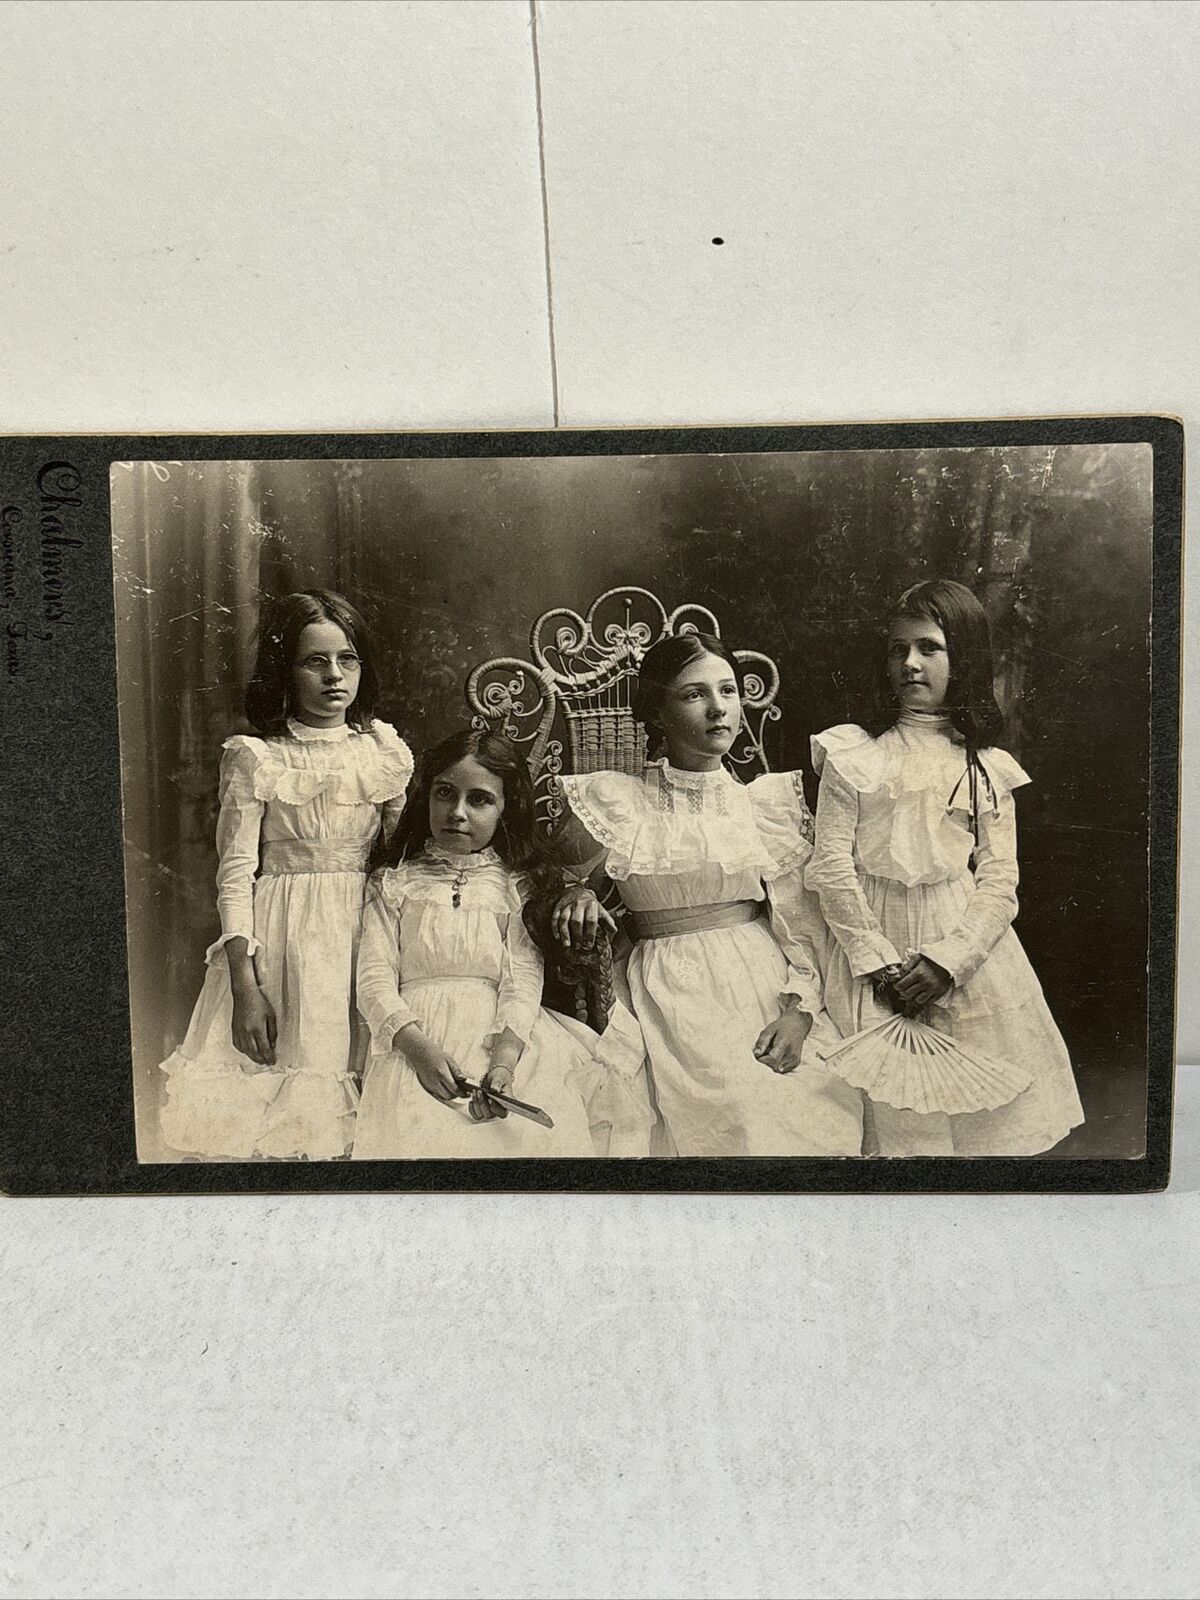 Black & White Vintage Cabinet Card Photo Young Ladies Wearing White Corsicana Tx